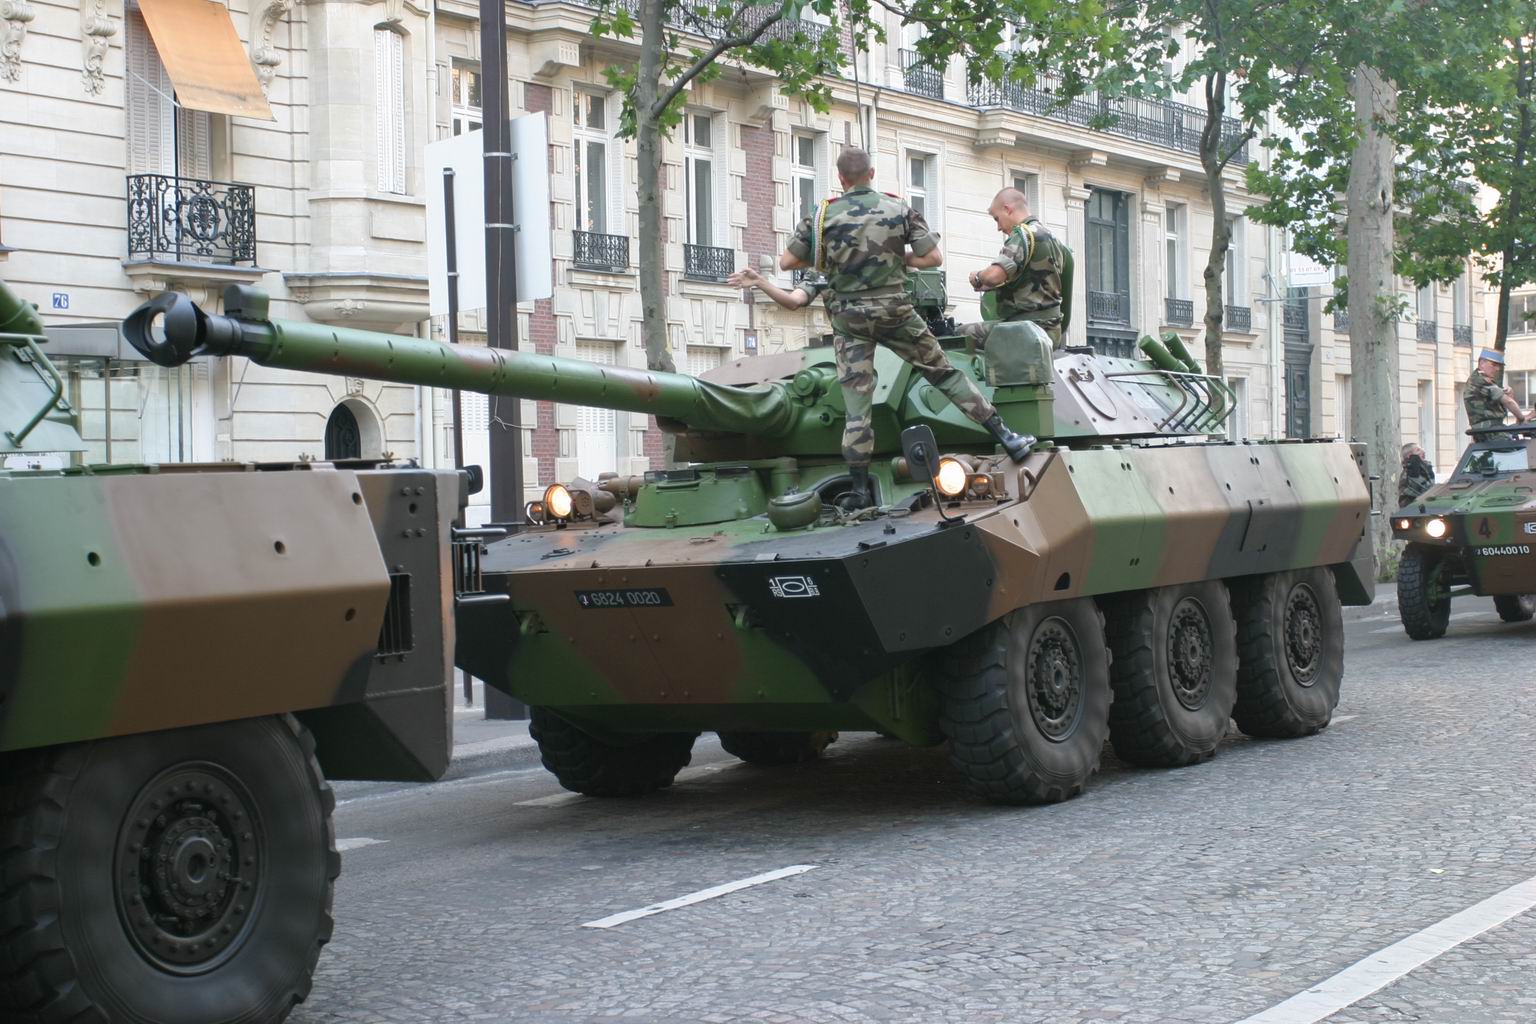 French AMX 10 RC fighting vehicles “have just arrived in Ukraine” – Lecornu